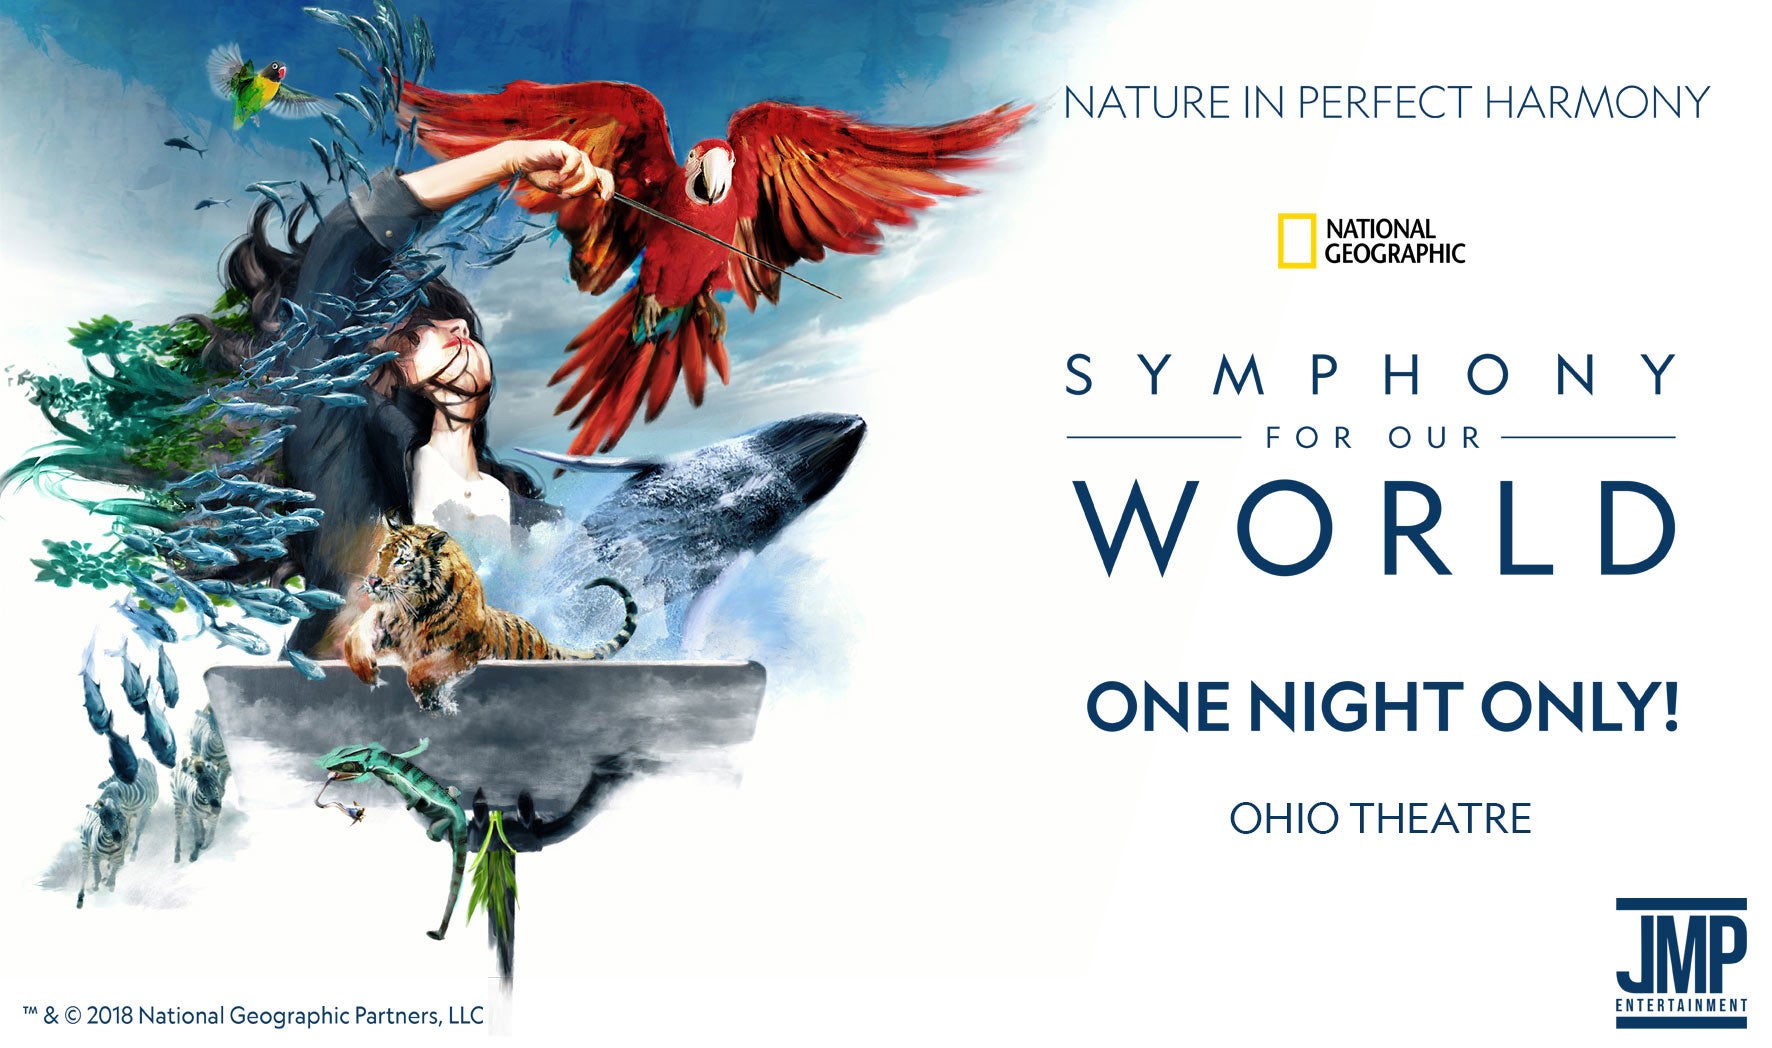 National Geographic Symphony for Our World